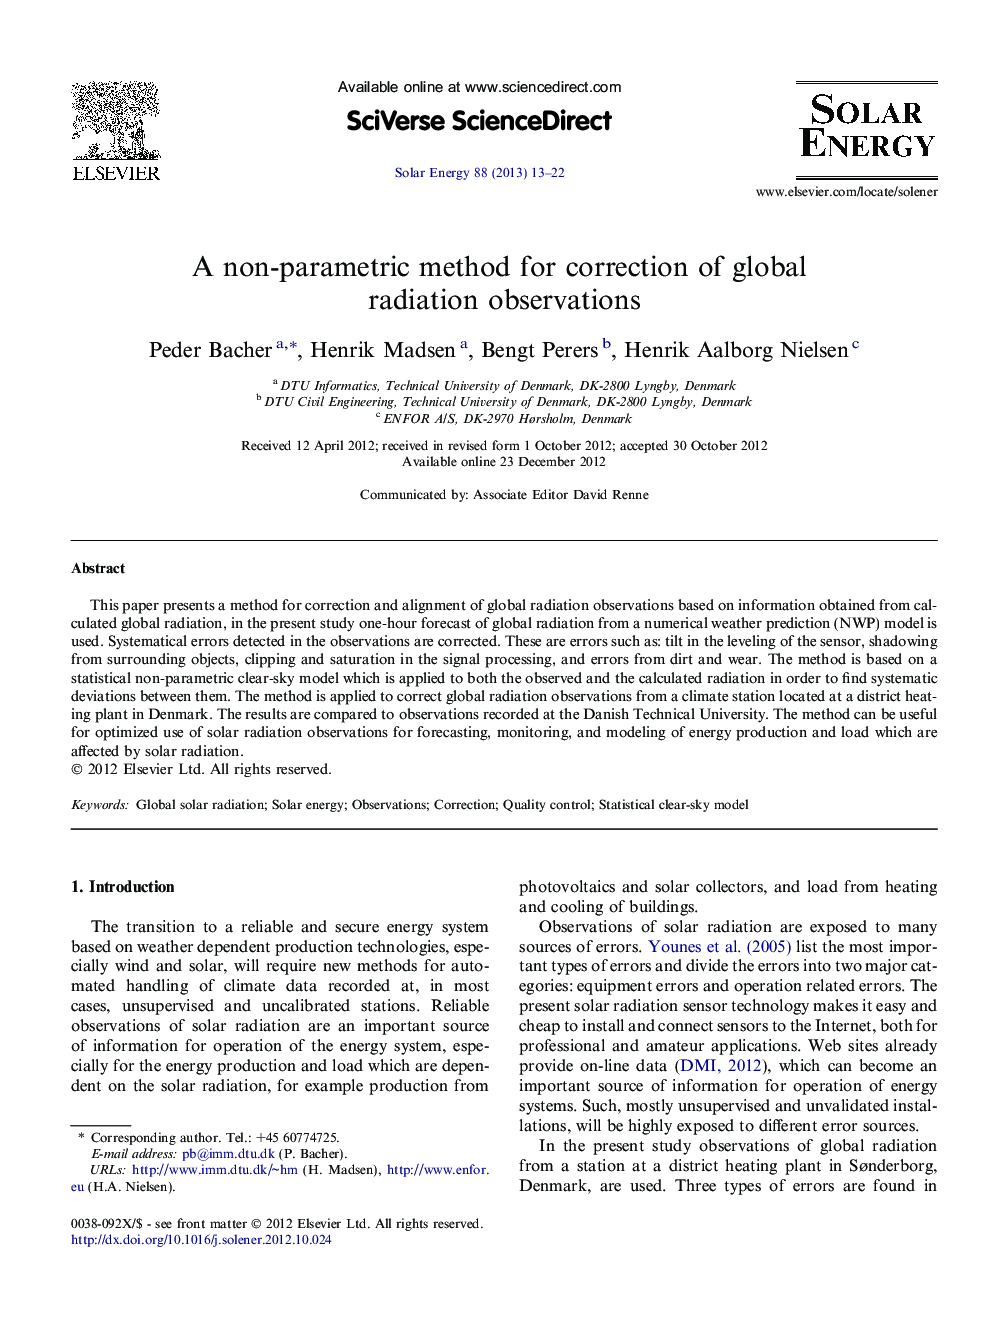 A non-parametric method for correction of global radiation observations